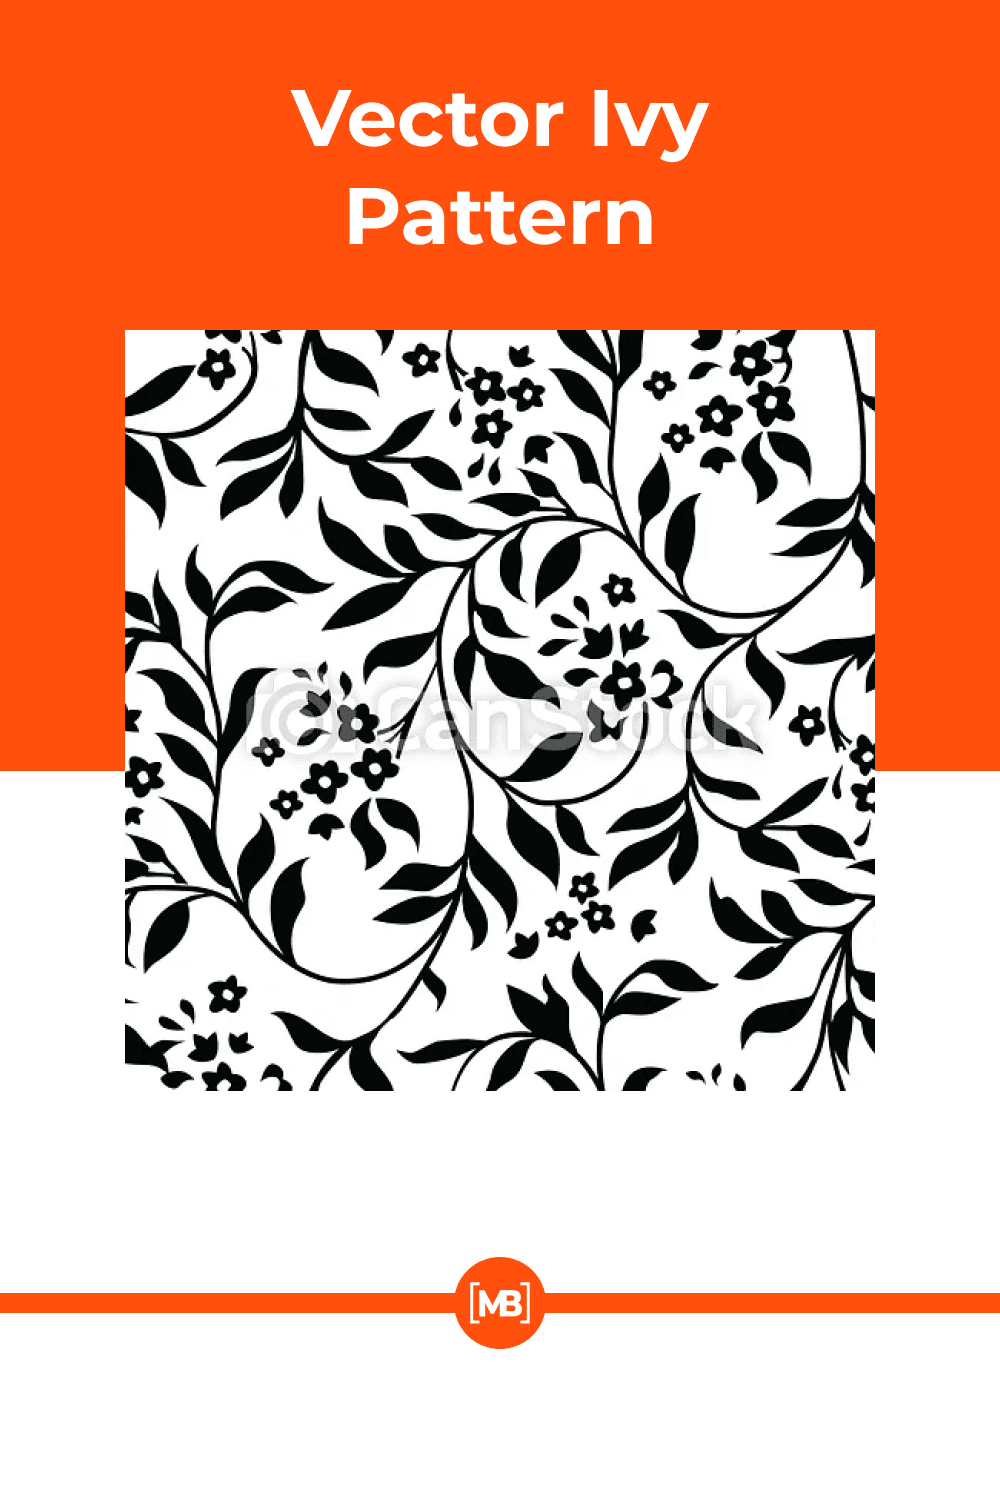 Black and white colors of ivy leaves.